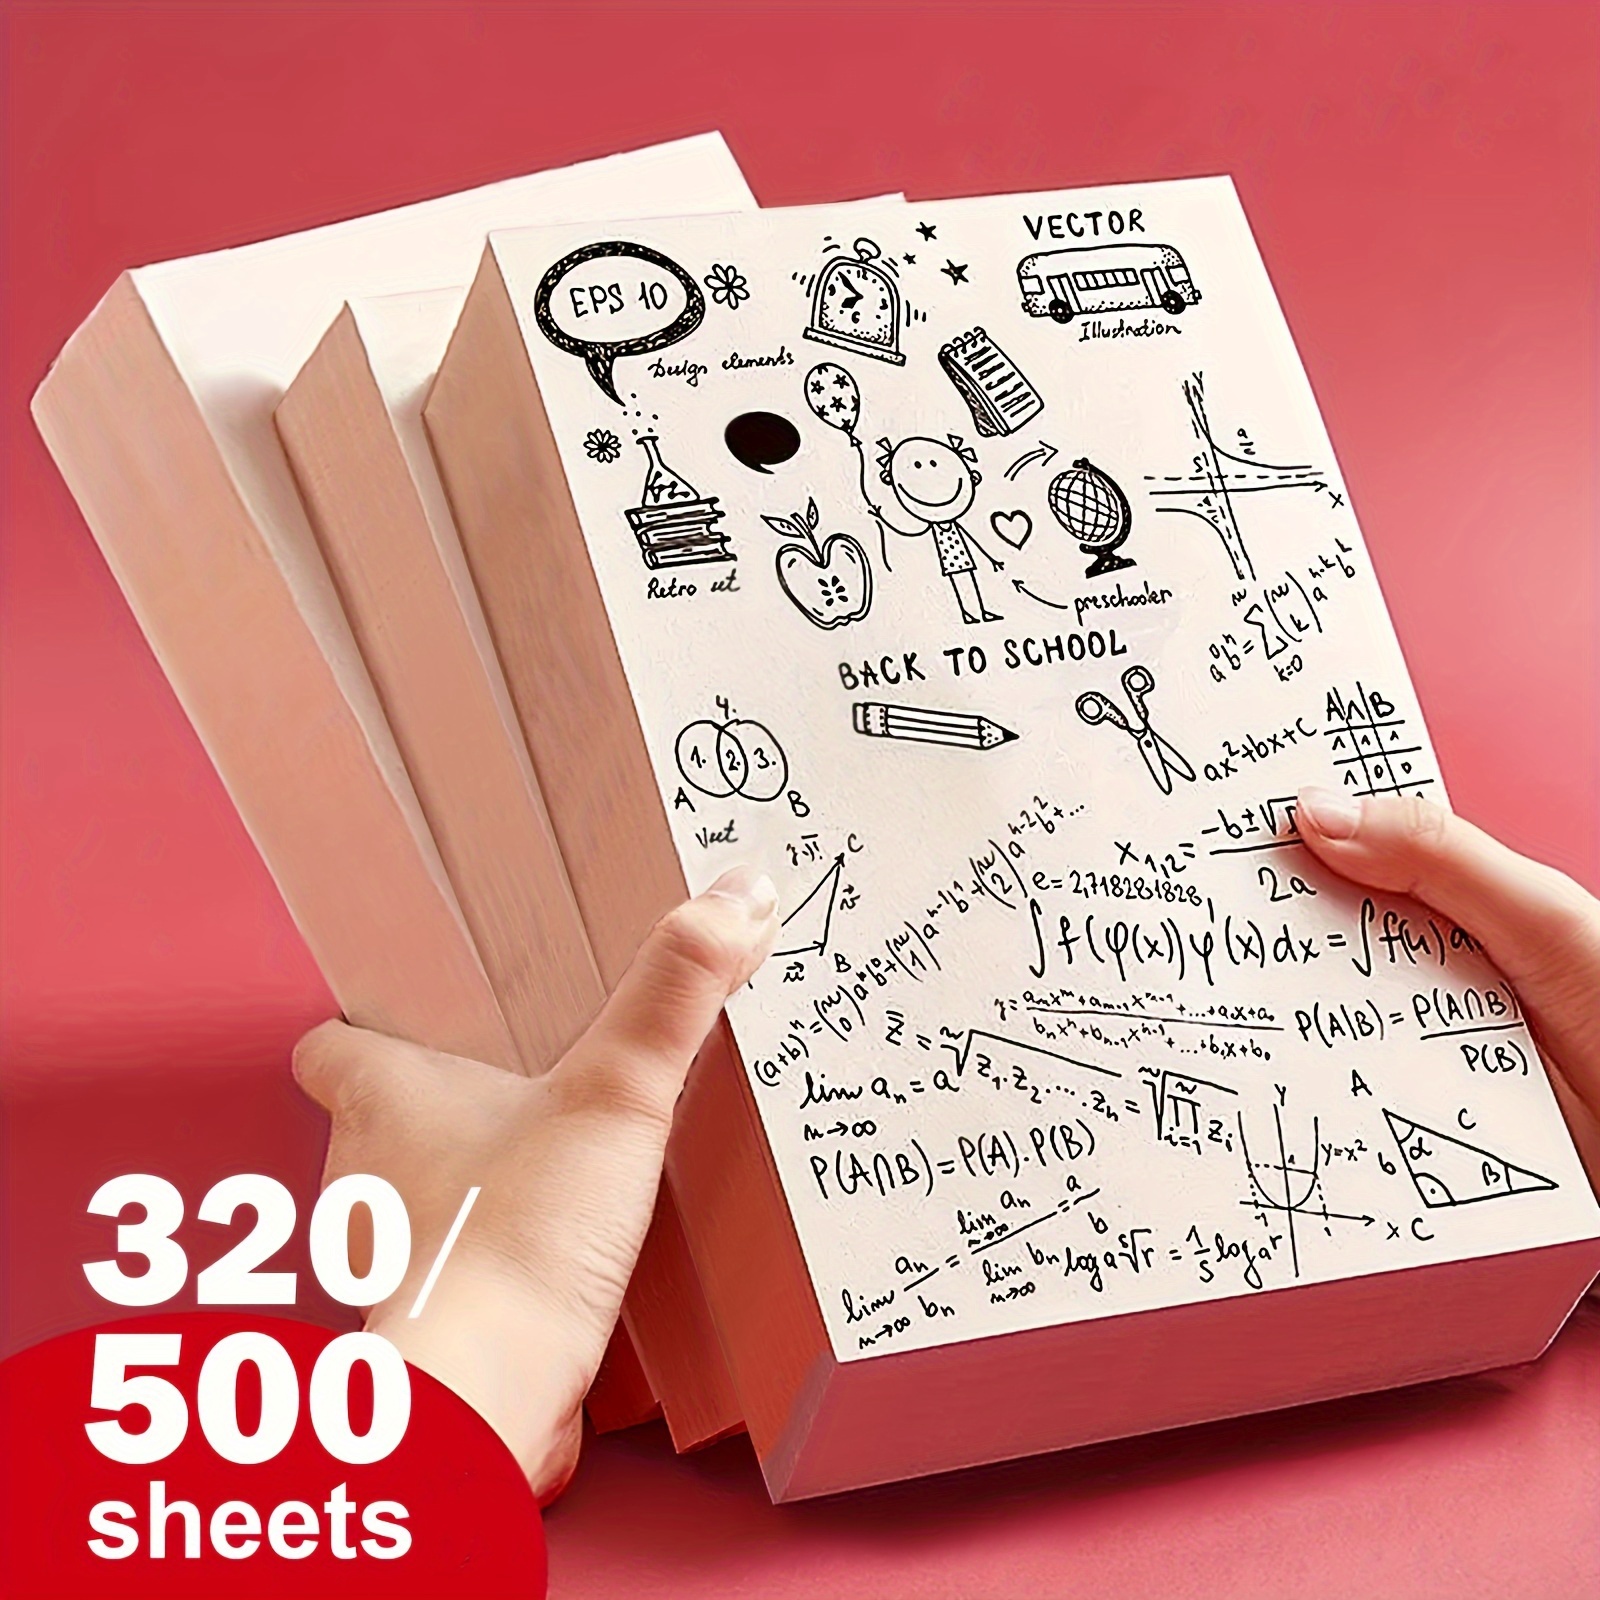 

1pc, 500pcs/1000 Pages, 320pcs/640 Pages, A5 Extra Thick Blank Sketchbook, Tearable Memo Pad, Sketch Paper, Painting Book, Sketchbook, Suitable For Office School Home